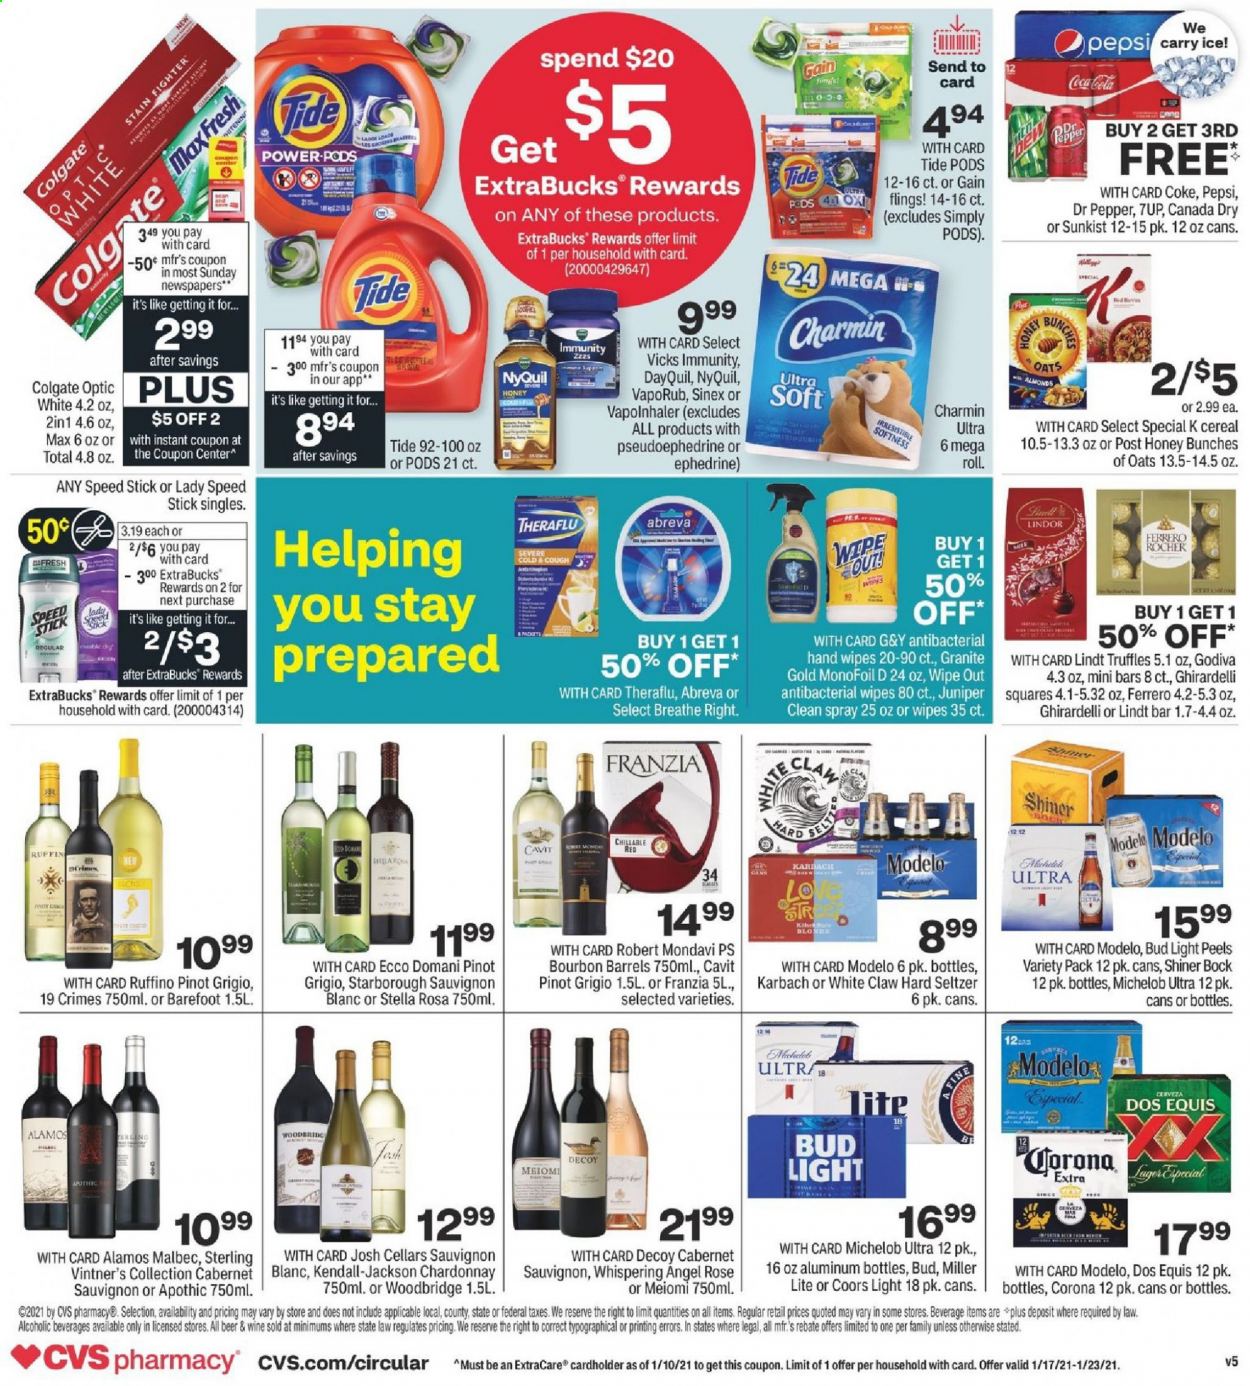 thumbnail - CVS Pharmacy Flyer - 01/17/2021 - 01/23/2021 - Sales products - Lindt, Lindor, Ferrero Rocher, truffles, Godiva, Ghirardelli, cereals, oats, almonds, Canada Dry, Coca-Cola, Pepsi, Dr. Pepper, 7UP, seltzer water, Cabernet Sauvignon, Chardonnay, wine, Pinot Grigio, Sauvignon Blanc, Woodbridge, bourbon, White Claw, Hard Seltzer, bourbon whiskey, Charmin, Gain, wipes, Tide, Colgate, Abreva, Speed Stick, Vicks, DayQuil, Theraflu, NyQuil, VapoRub, Sinex, beer, Miller Lite, Coors, Dos Equis, Michelob, Bud Light, Corona Extra, Modelo. Page 2.